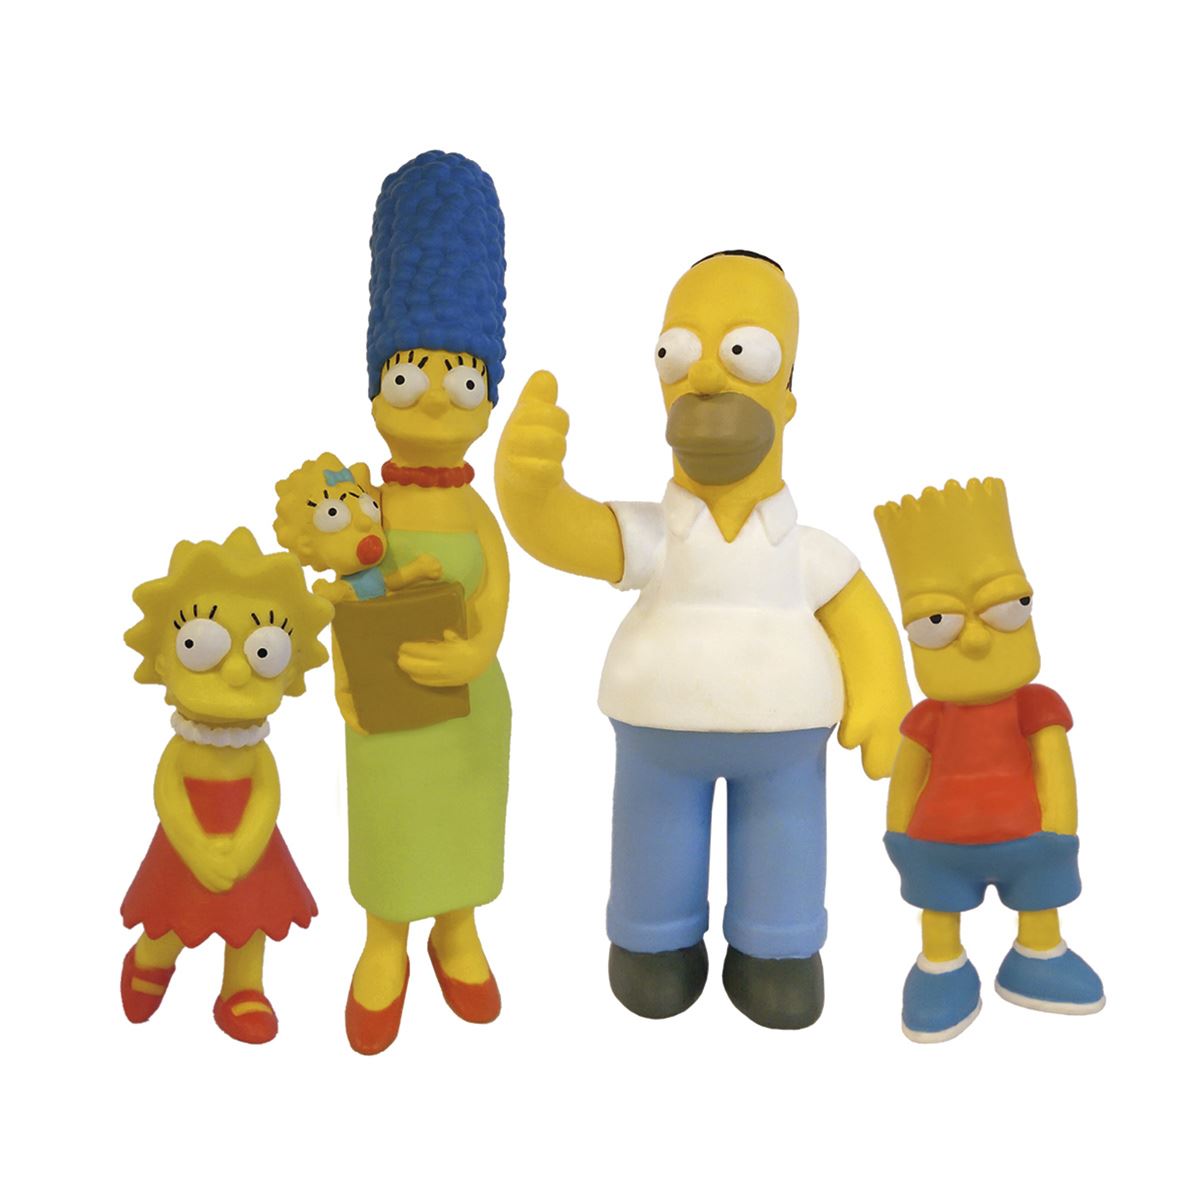 Los Simpsons Family Pack 3"